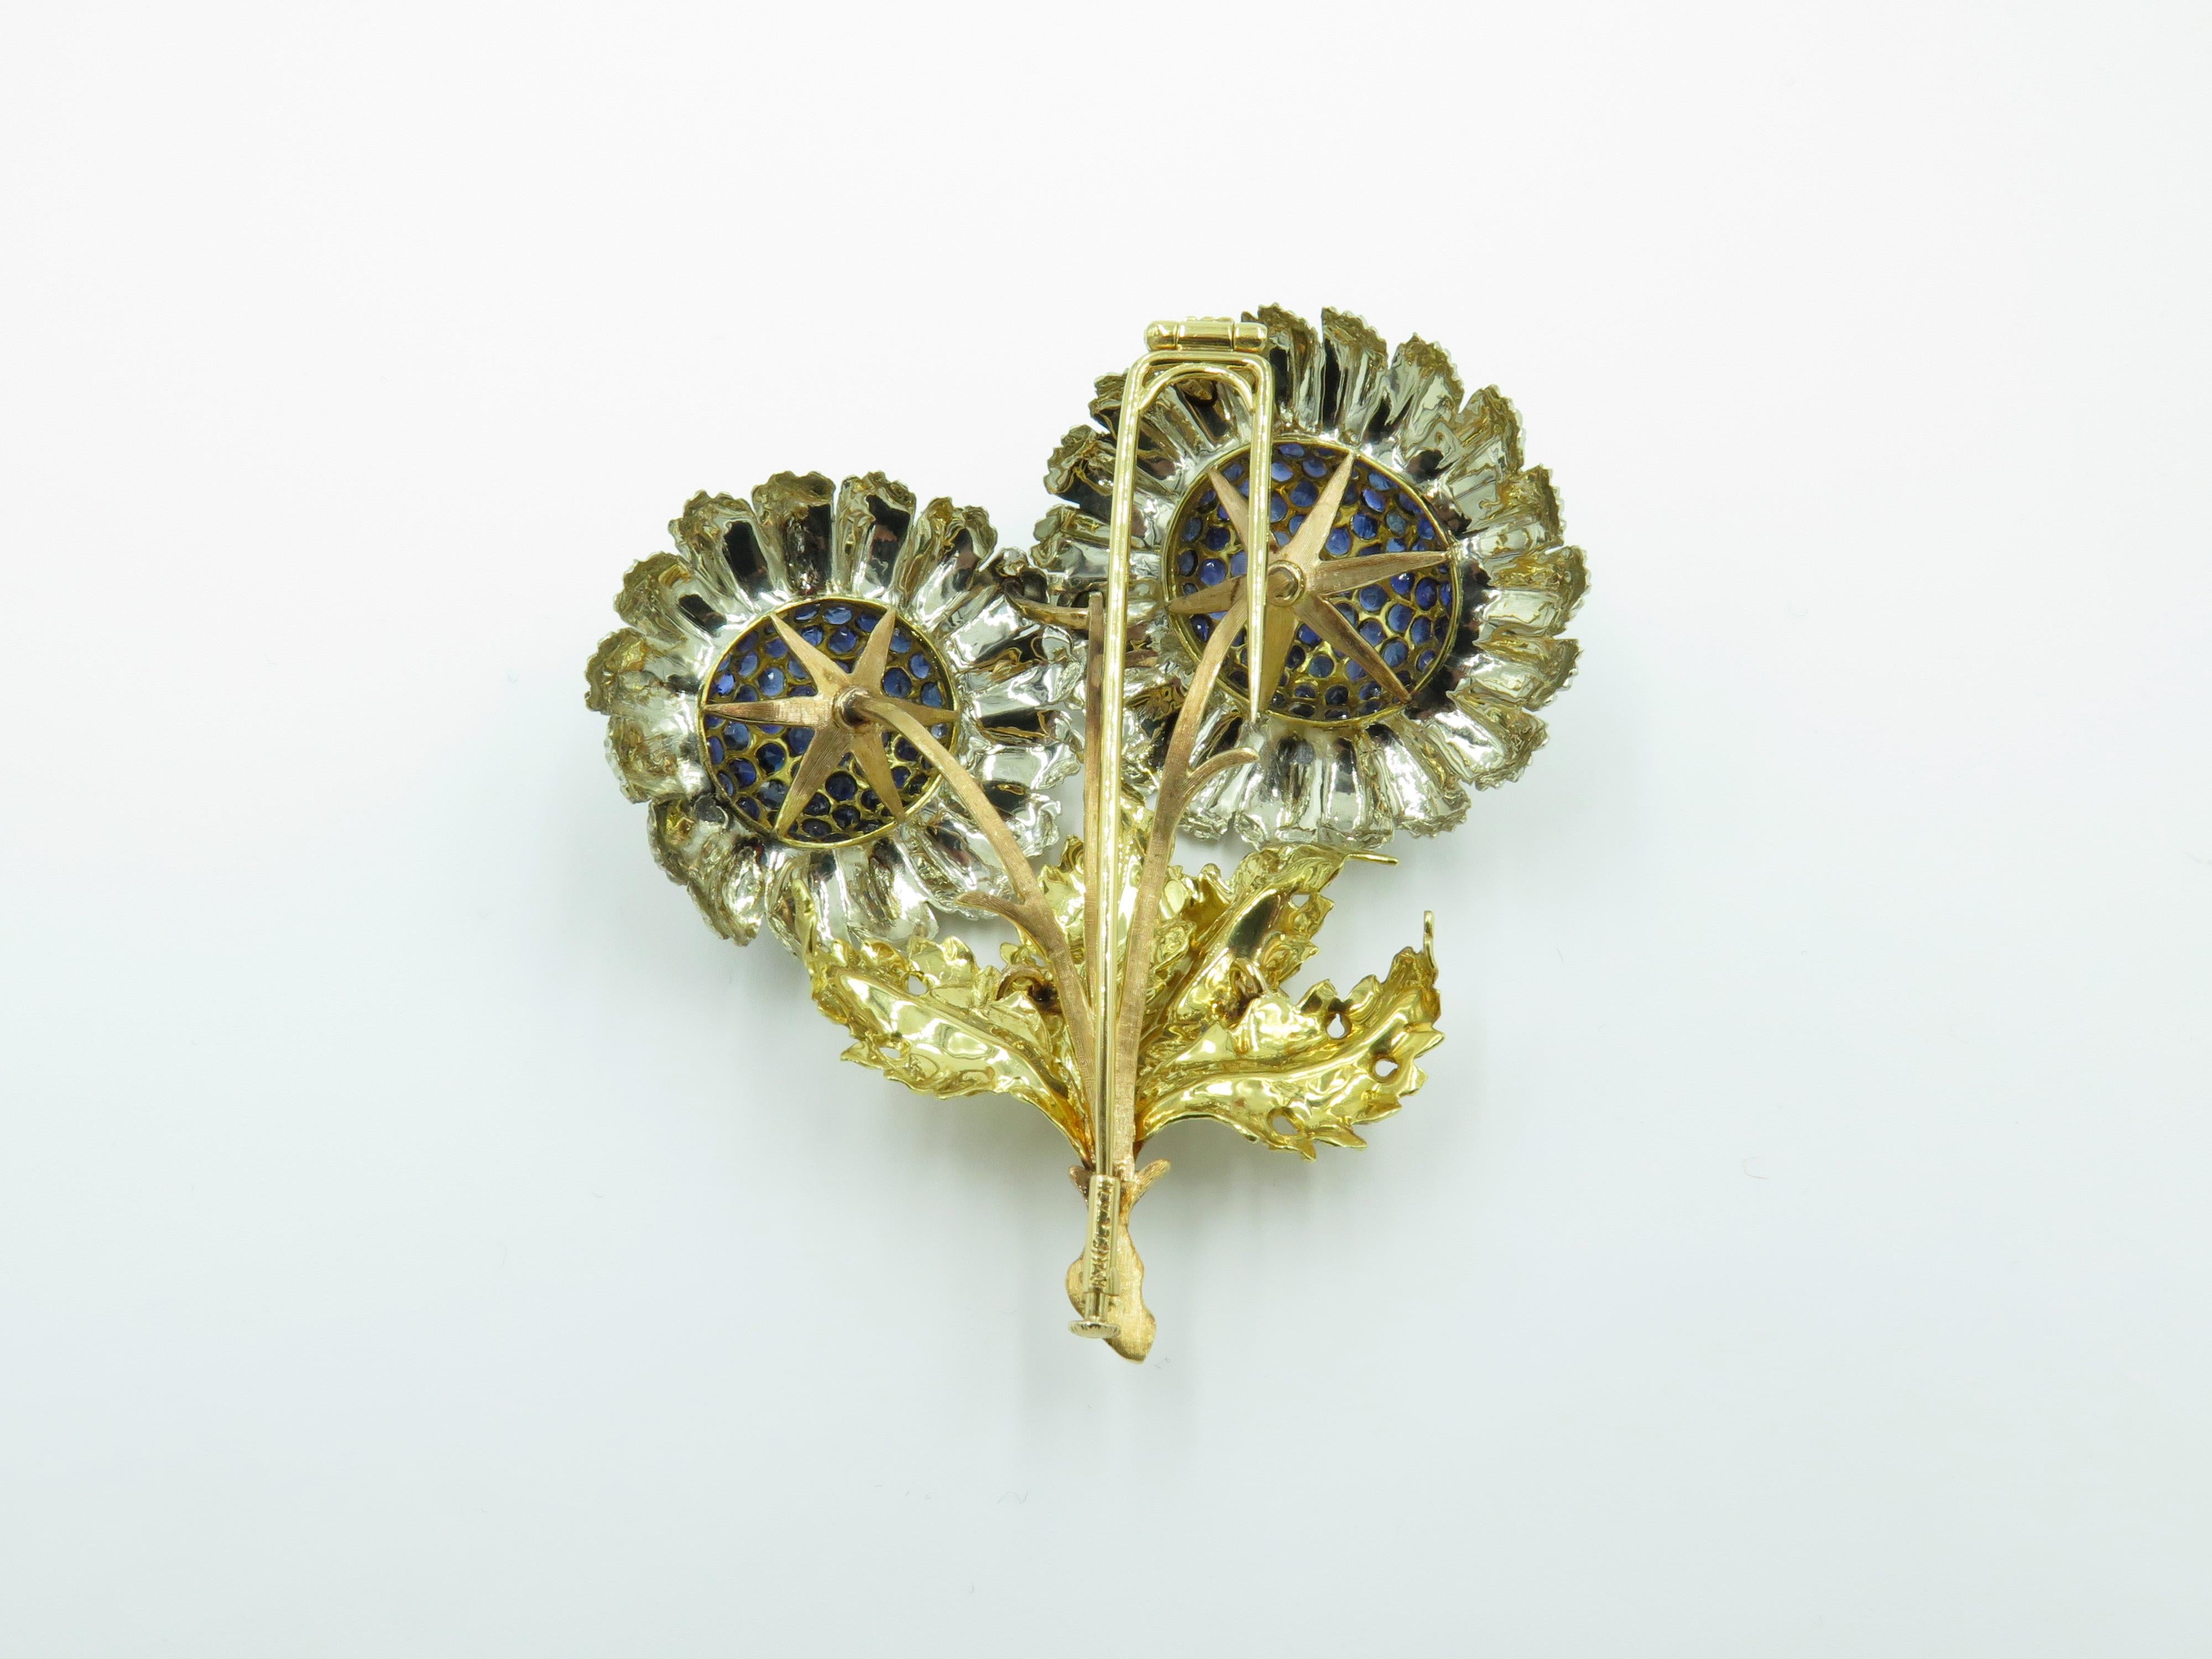 An 18 karat yellow gold, white gold and sapphire brooch. Buccellati. Circa 1960. Designed as two daisies, extending textured white gold petals, with pave sapphire centers,  with textured gold stem and leaves. Length is approximately 2 3/4 inches,